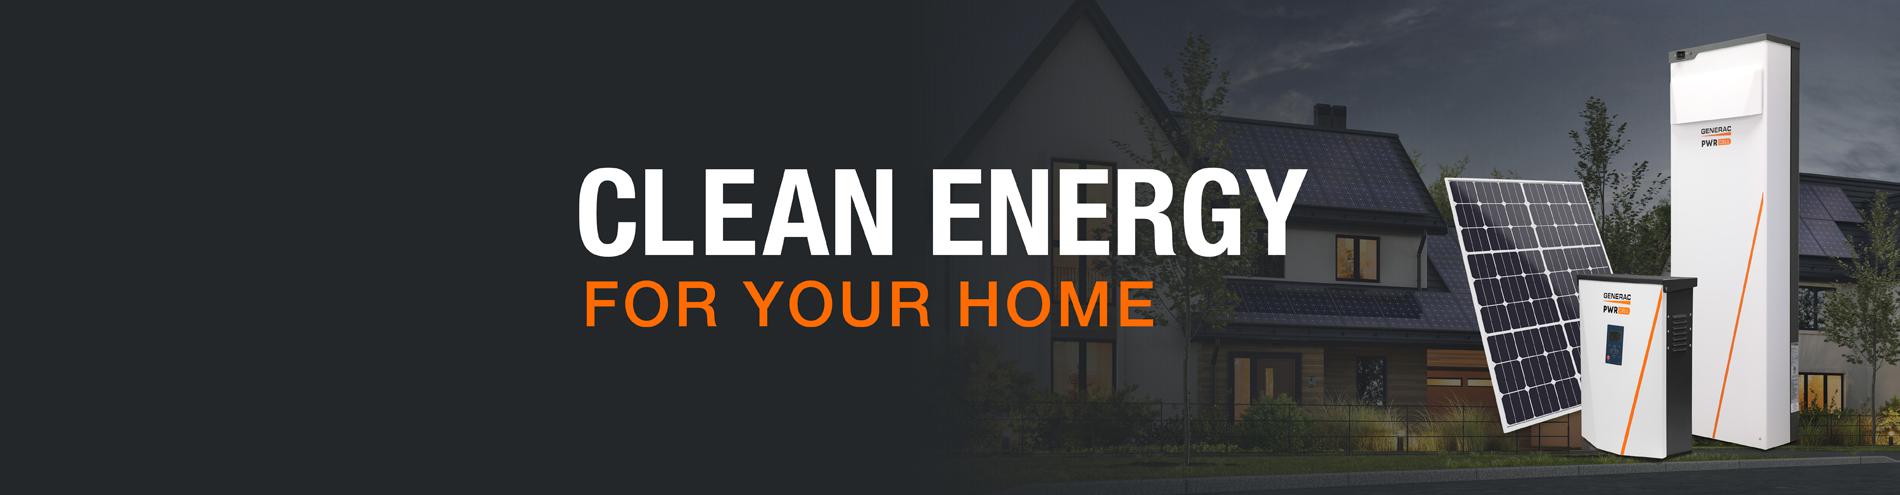 Clean energy banner image